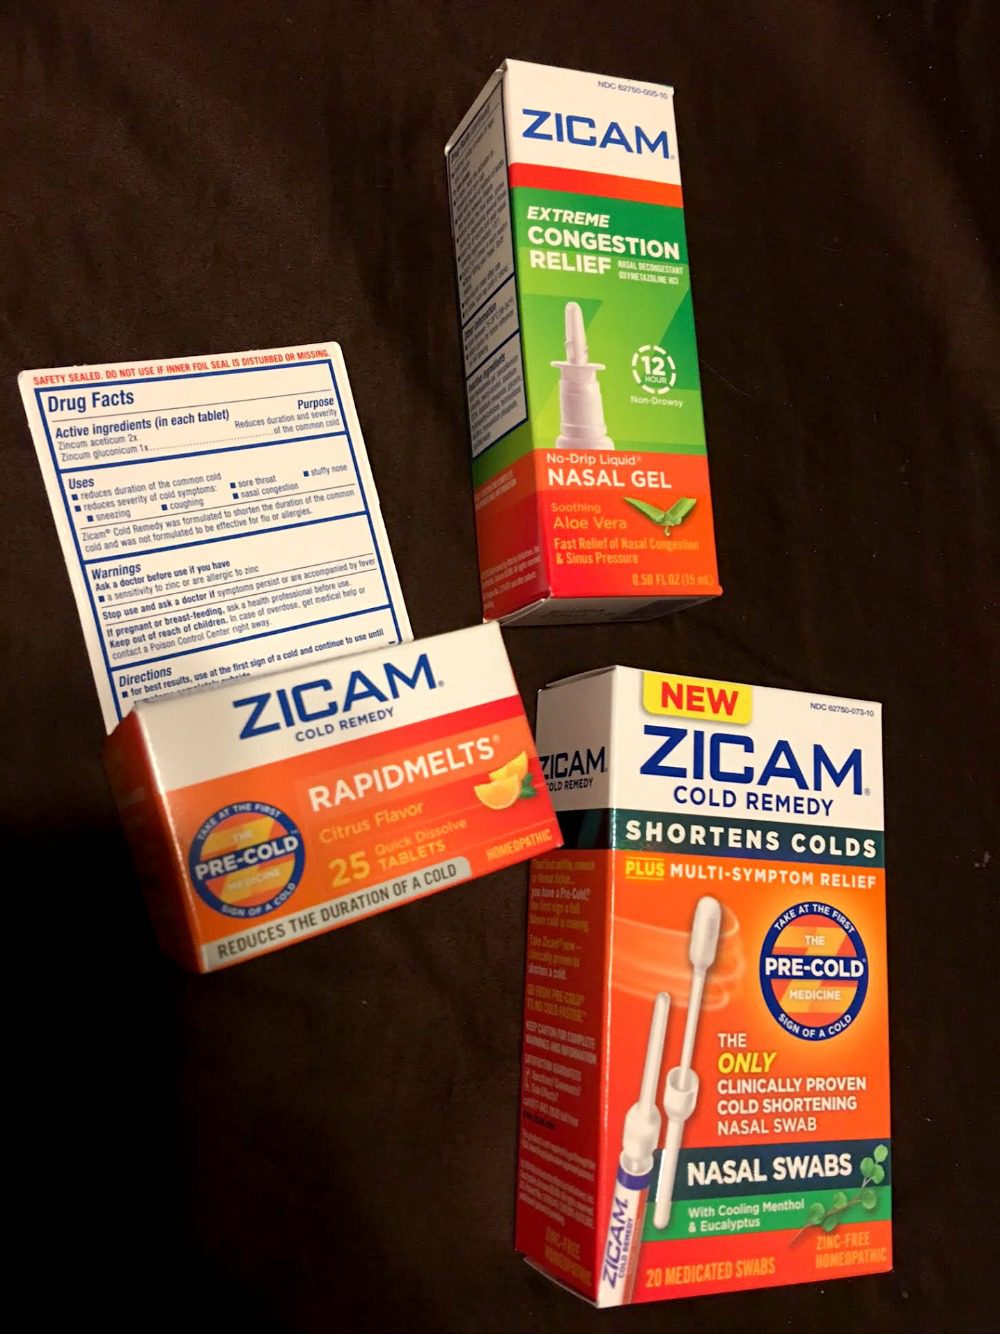 use-zicam-cold-remedy-nasal-swabs-for-cold-shortening-divine-lifestyle